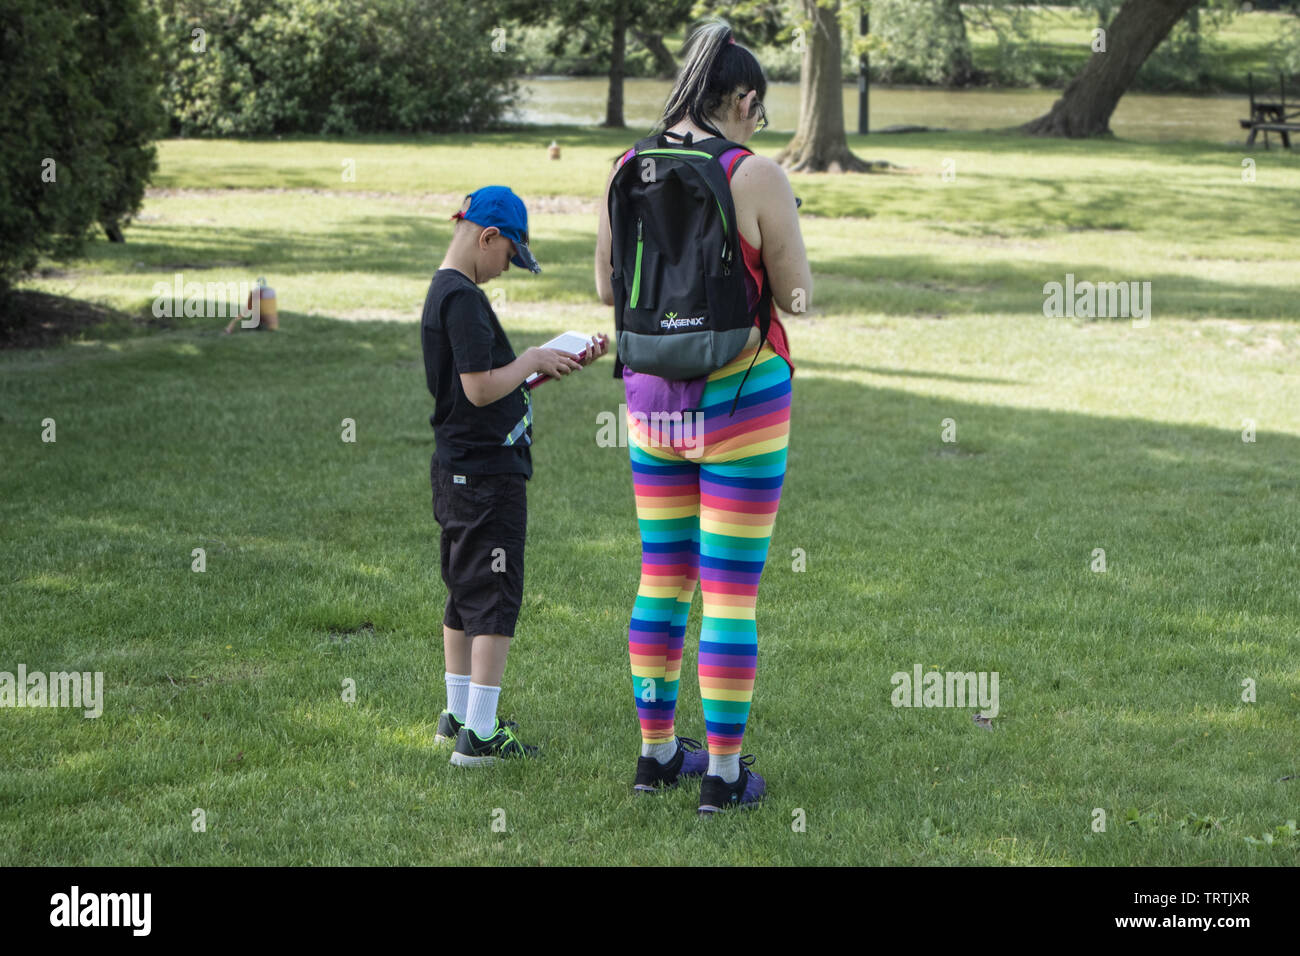 Adult female, oddly dressed with colourful horizontal stripes and a young boy. Both are consulting electronic devices. Stock Photo